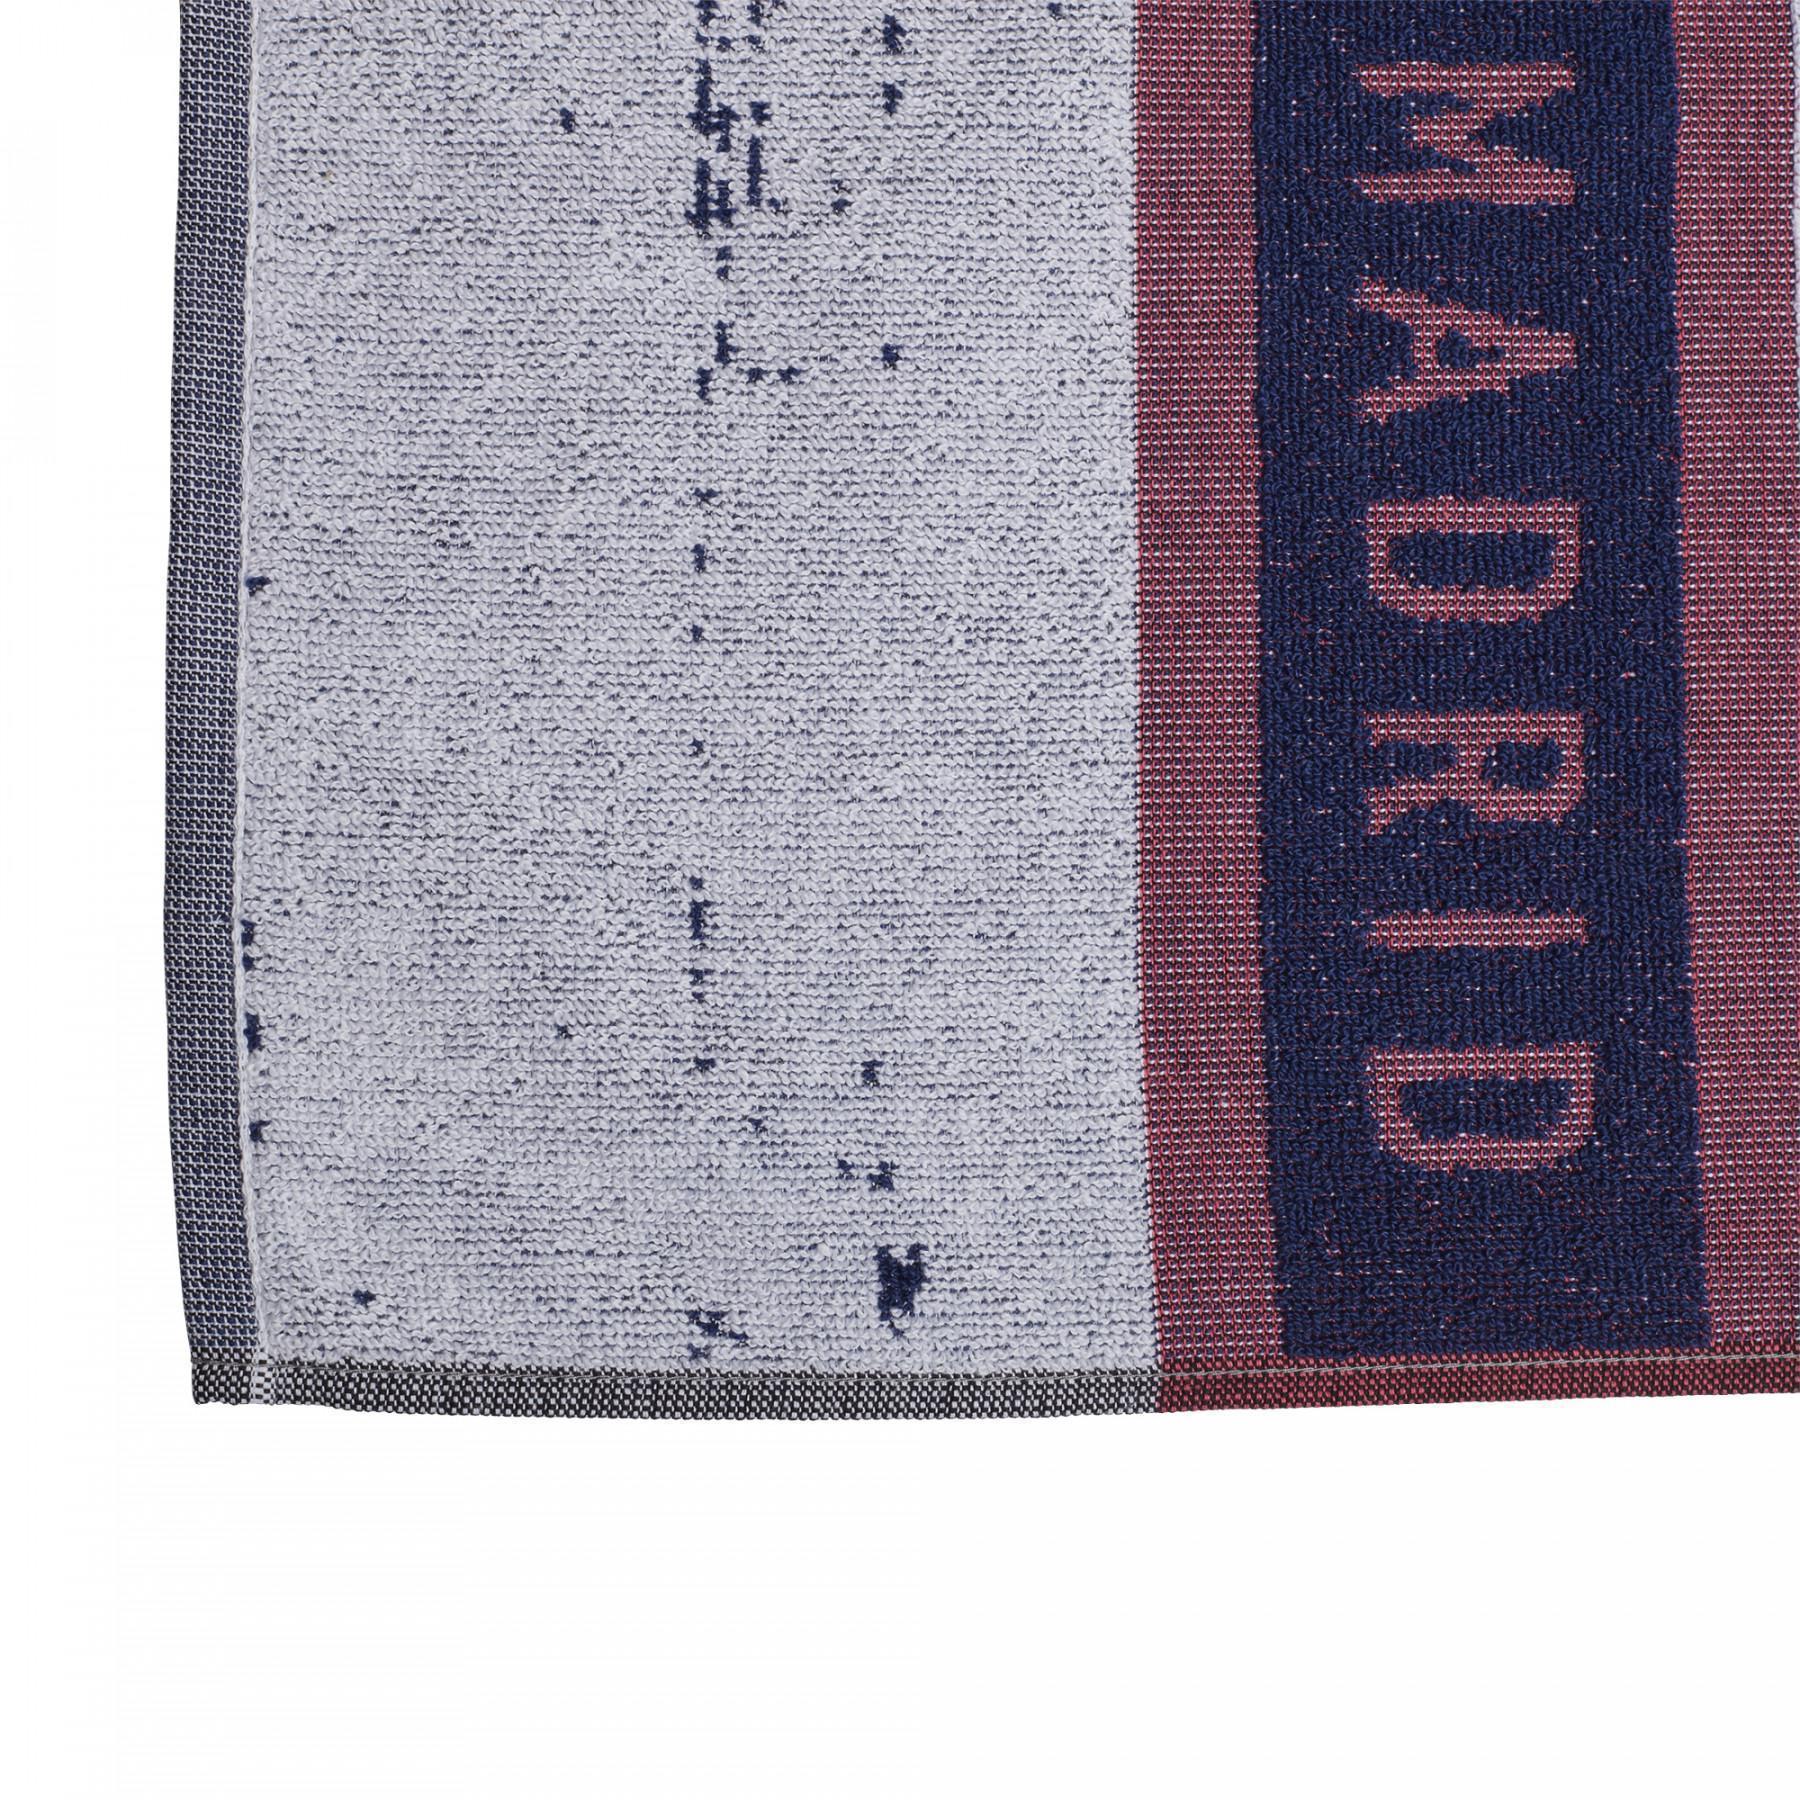 Handtuch Real Madrid Cotton